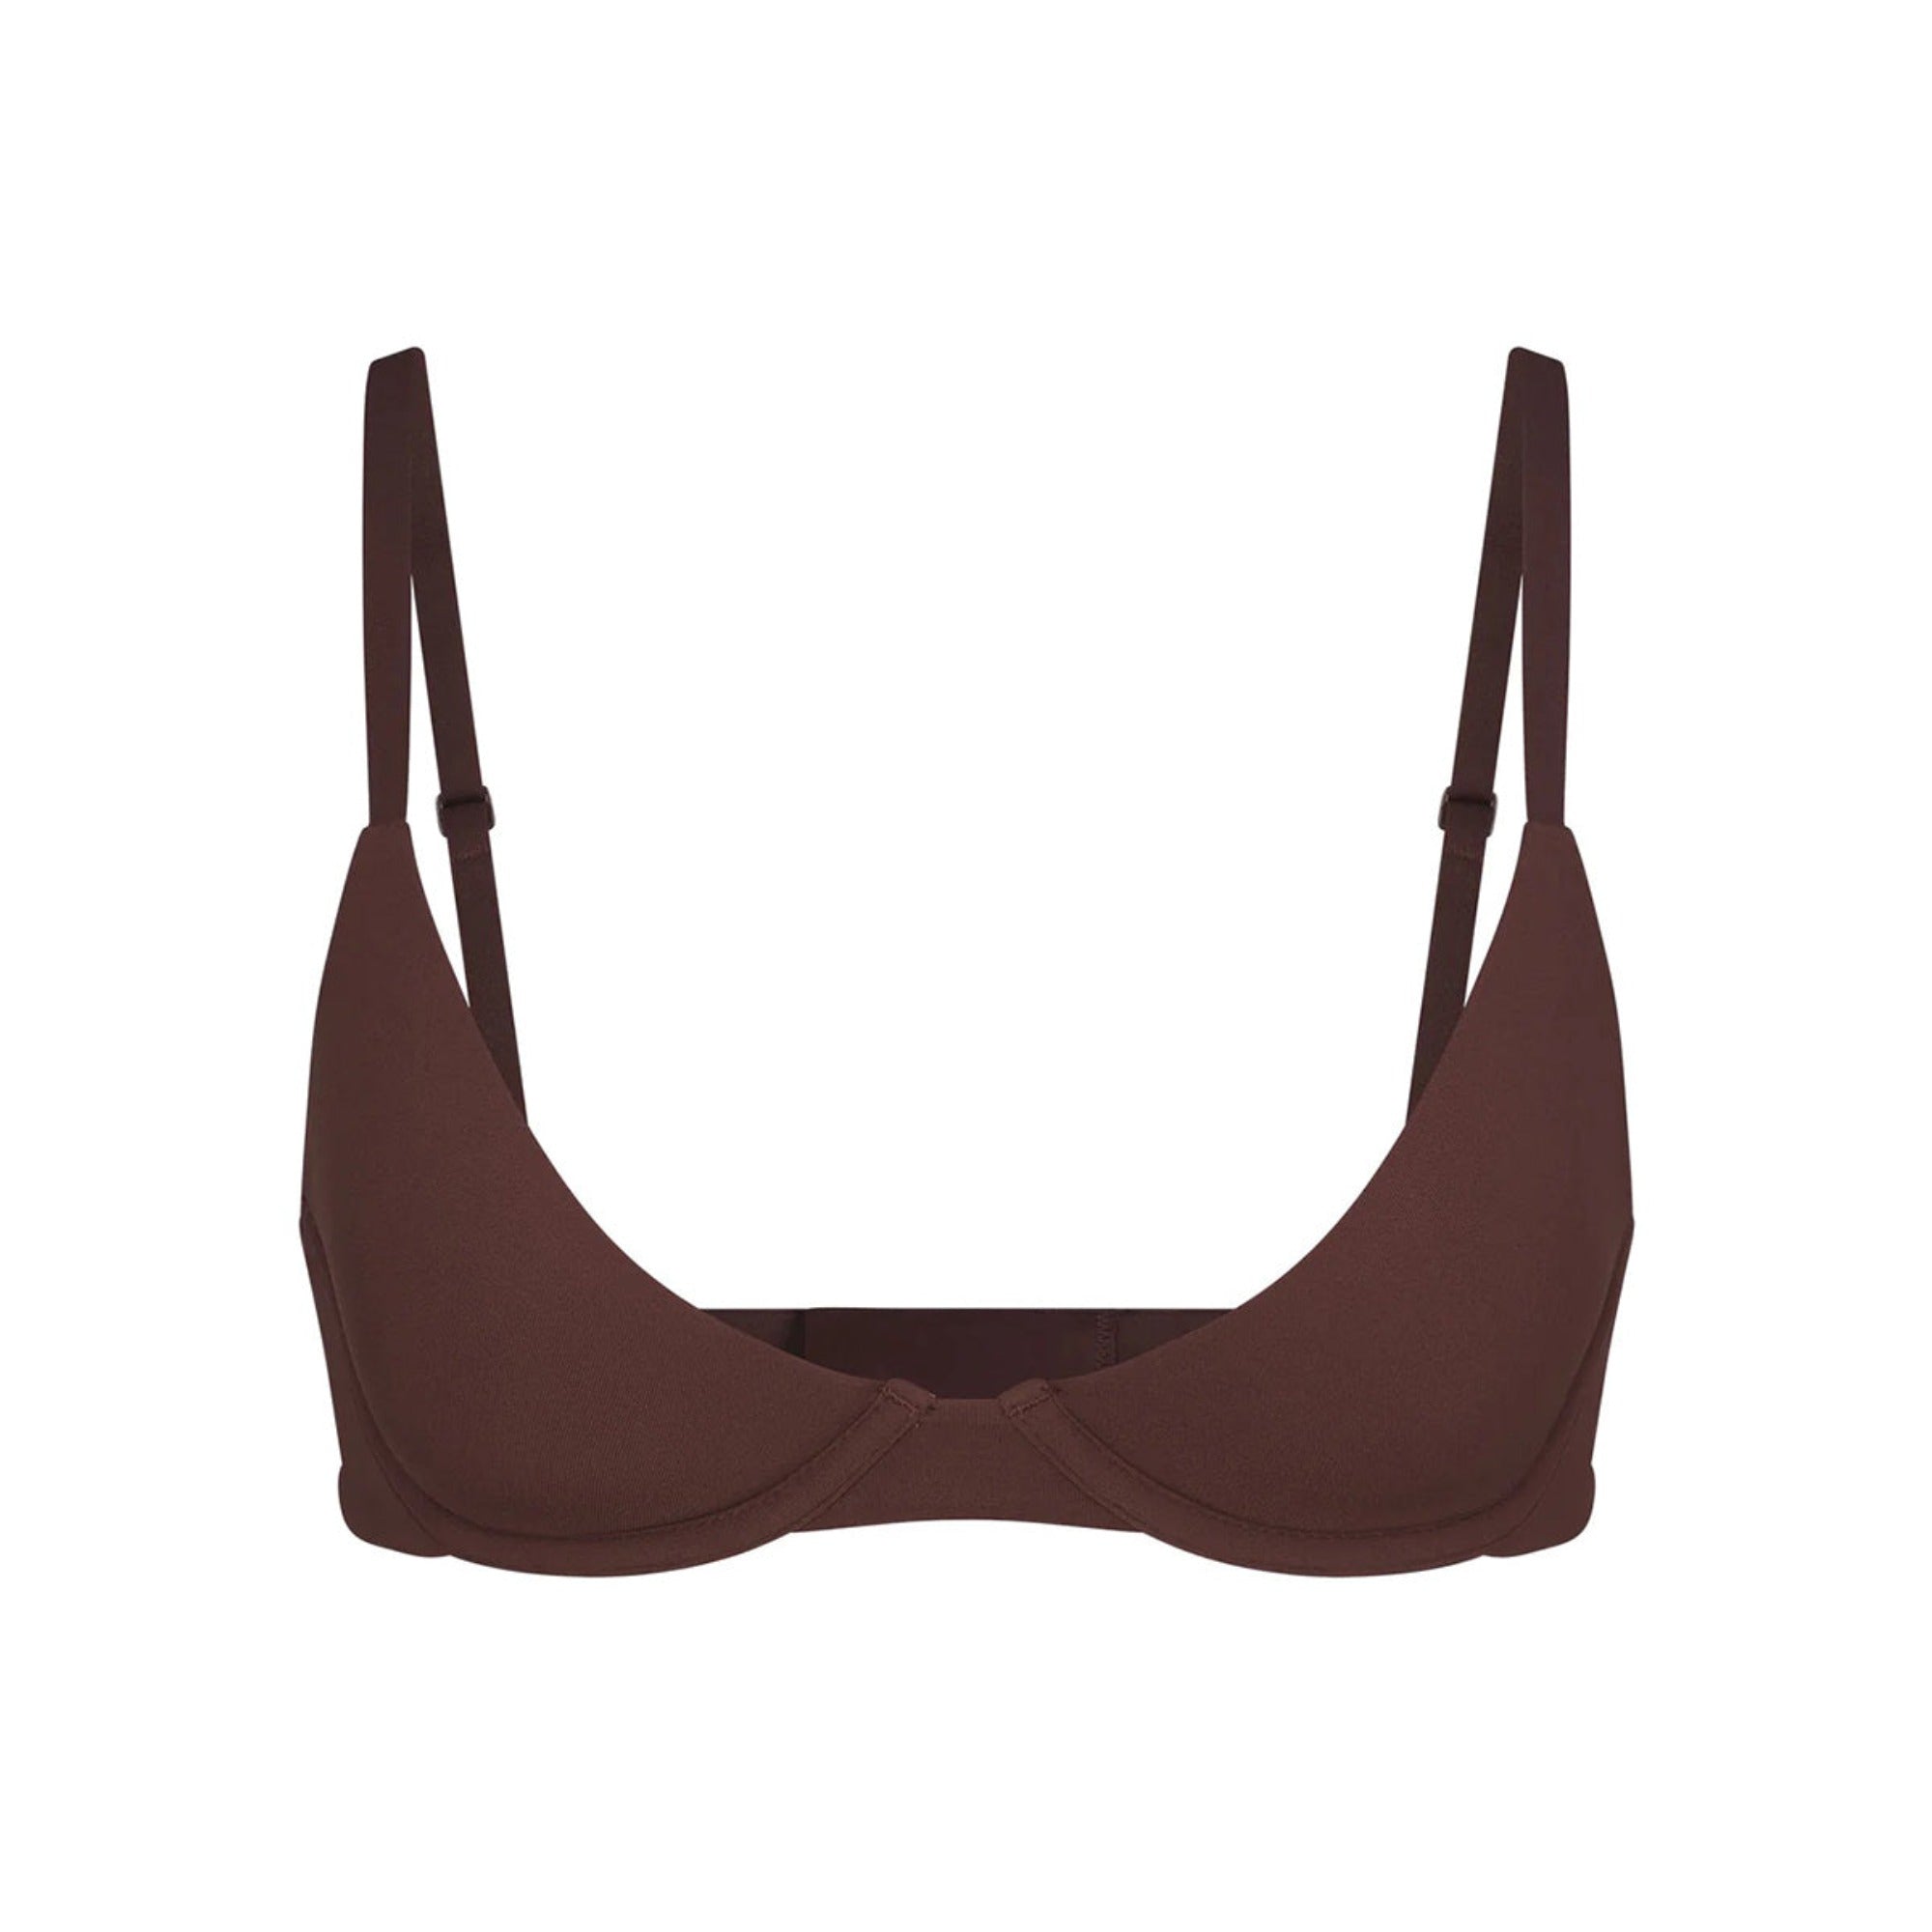 I usually hate push-up bras but Skims' new buy is amazing in 34B, I